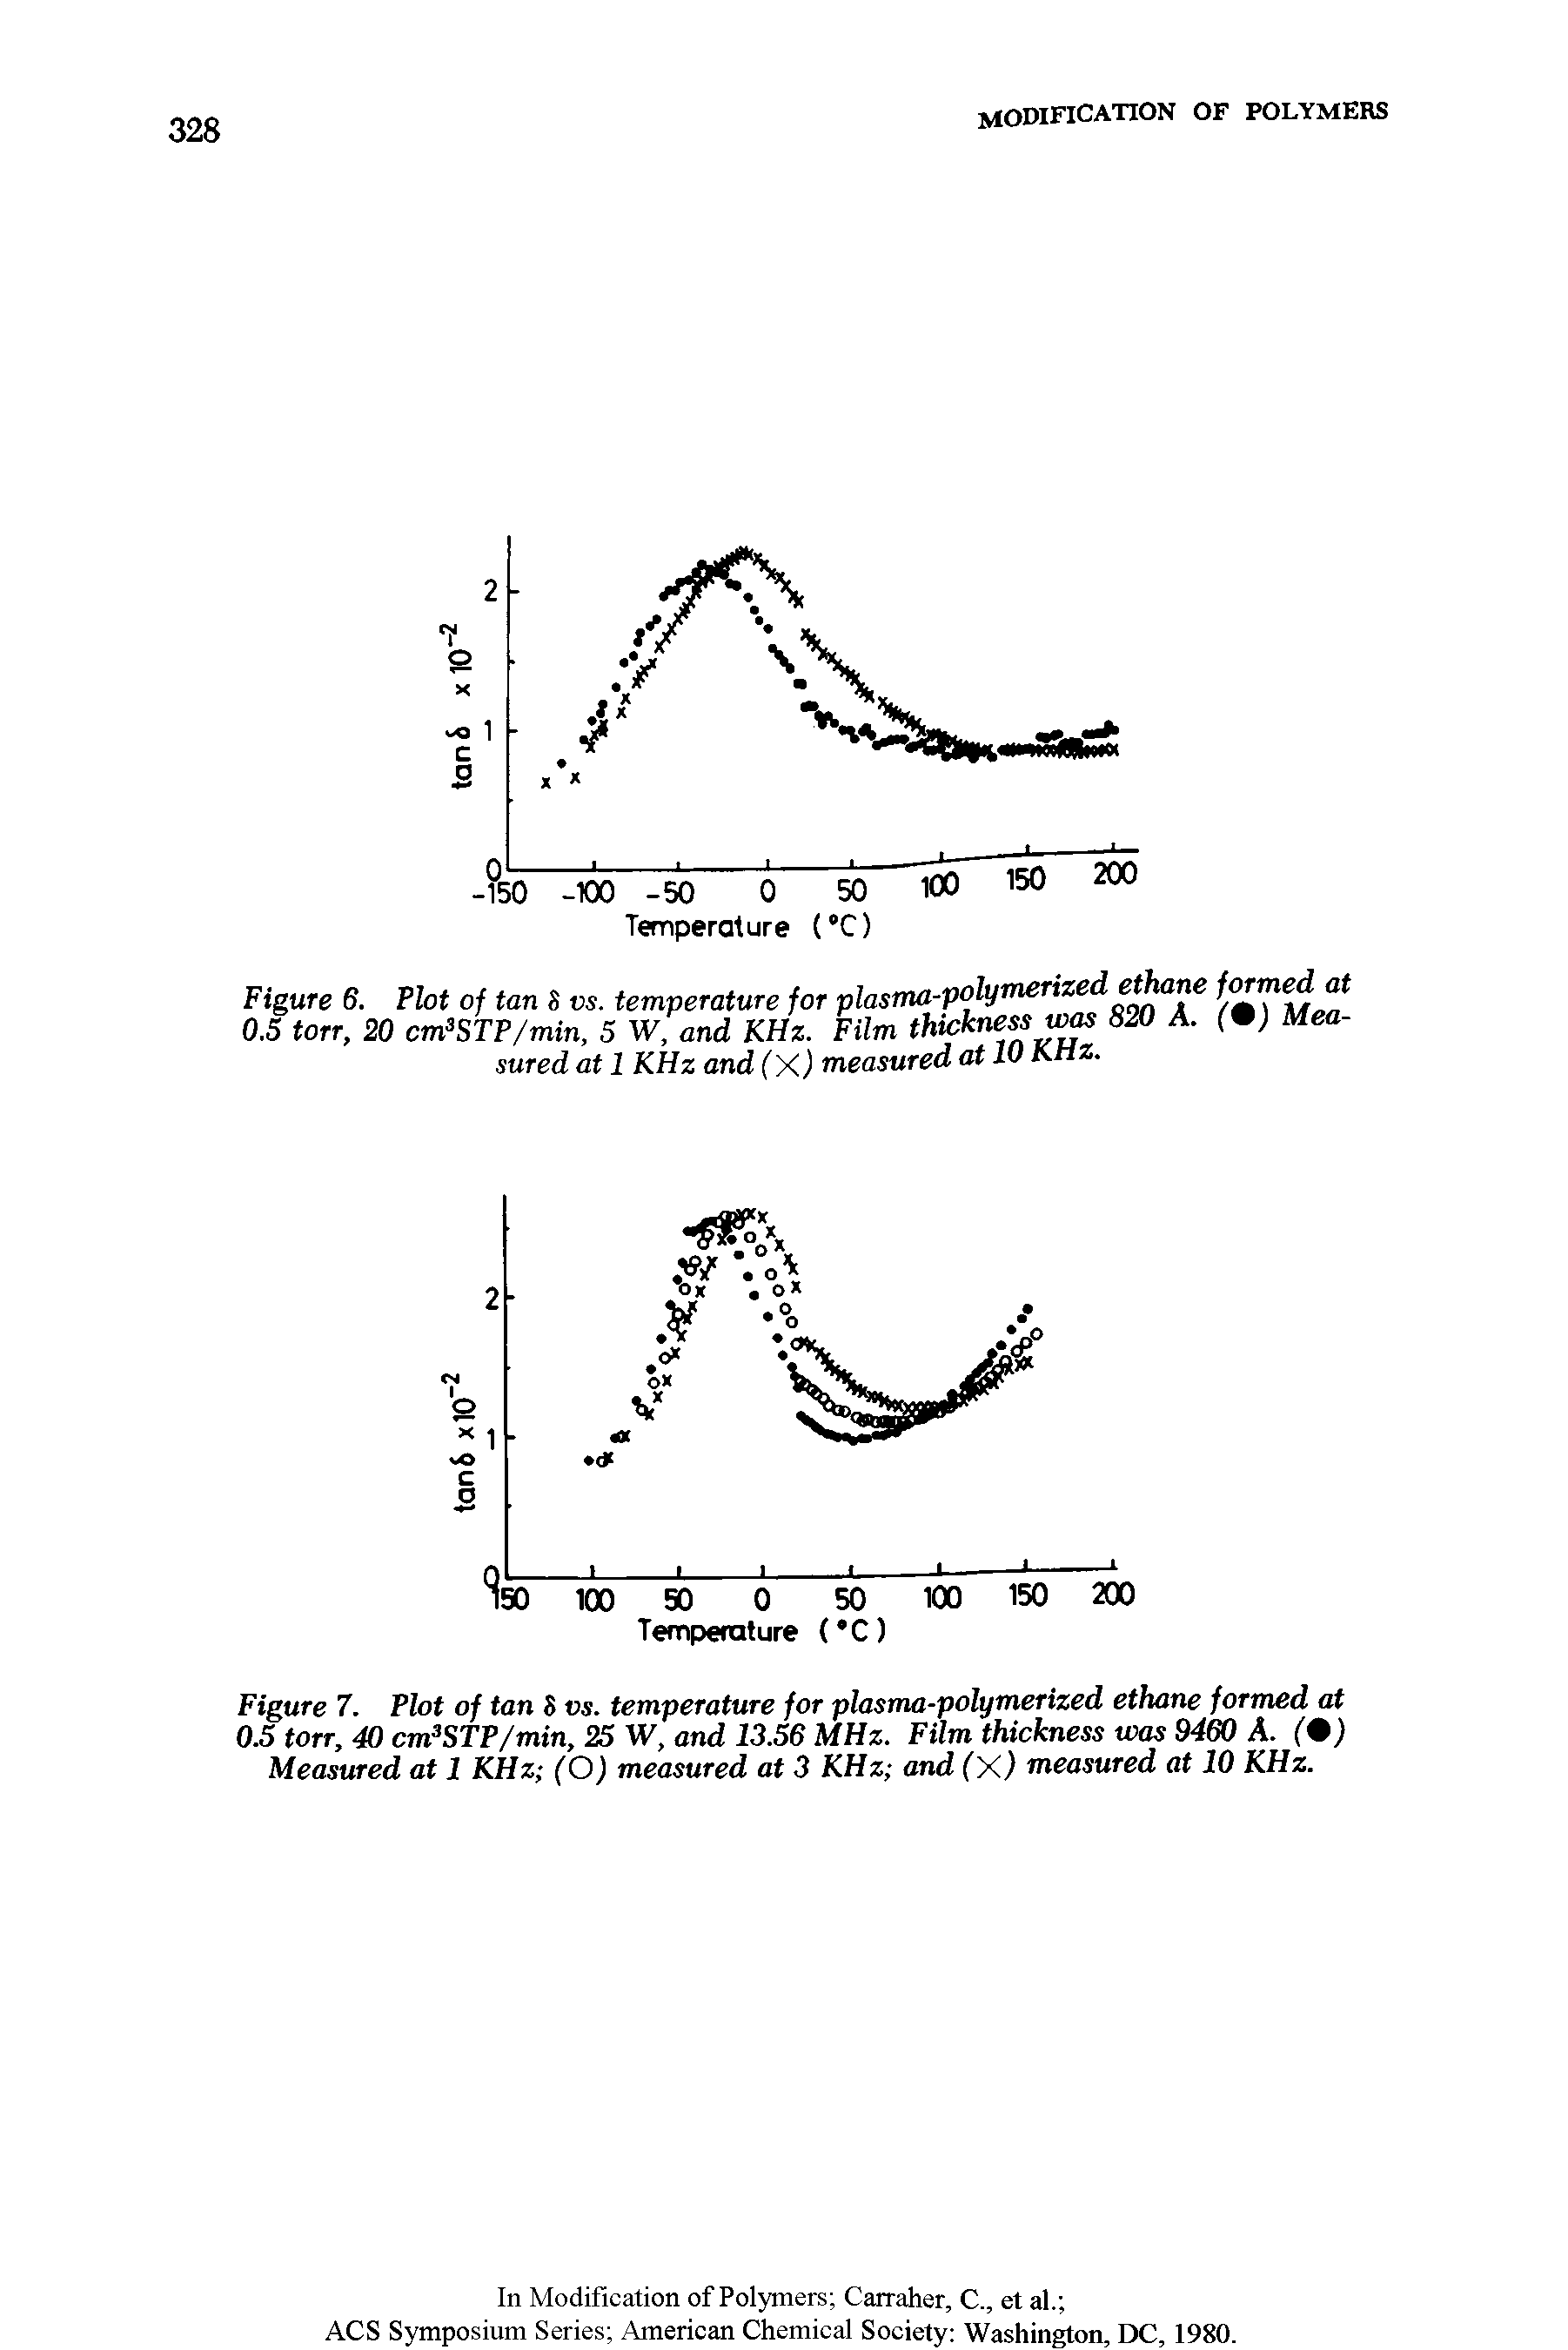 Figure 6. Plot of tan 8 vs. temperature for plasma-polymerized ethane formed at 0.5 ton, 20 cmsSTP/min, 5 W, and KHz. Film thickness was 820 A. (9) Measured at 1 KHz and (X) measured at 10 KHz.